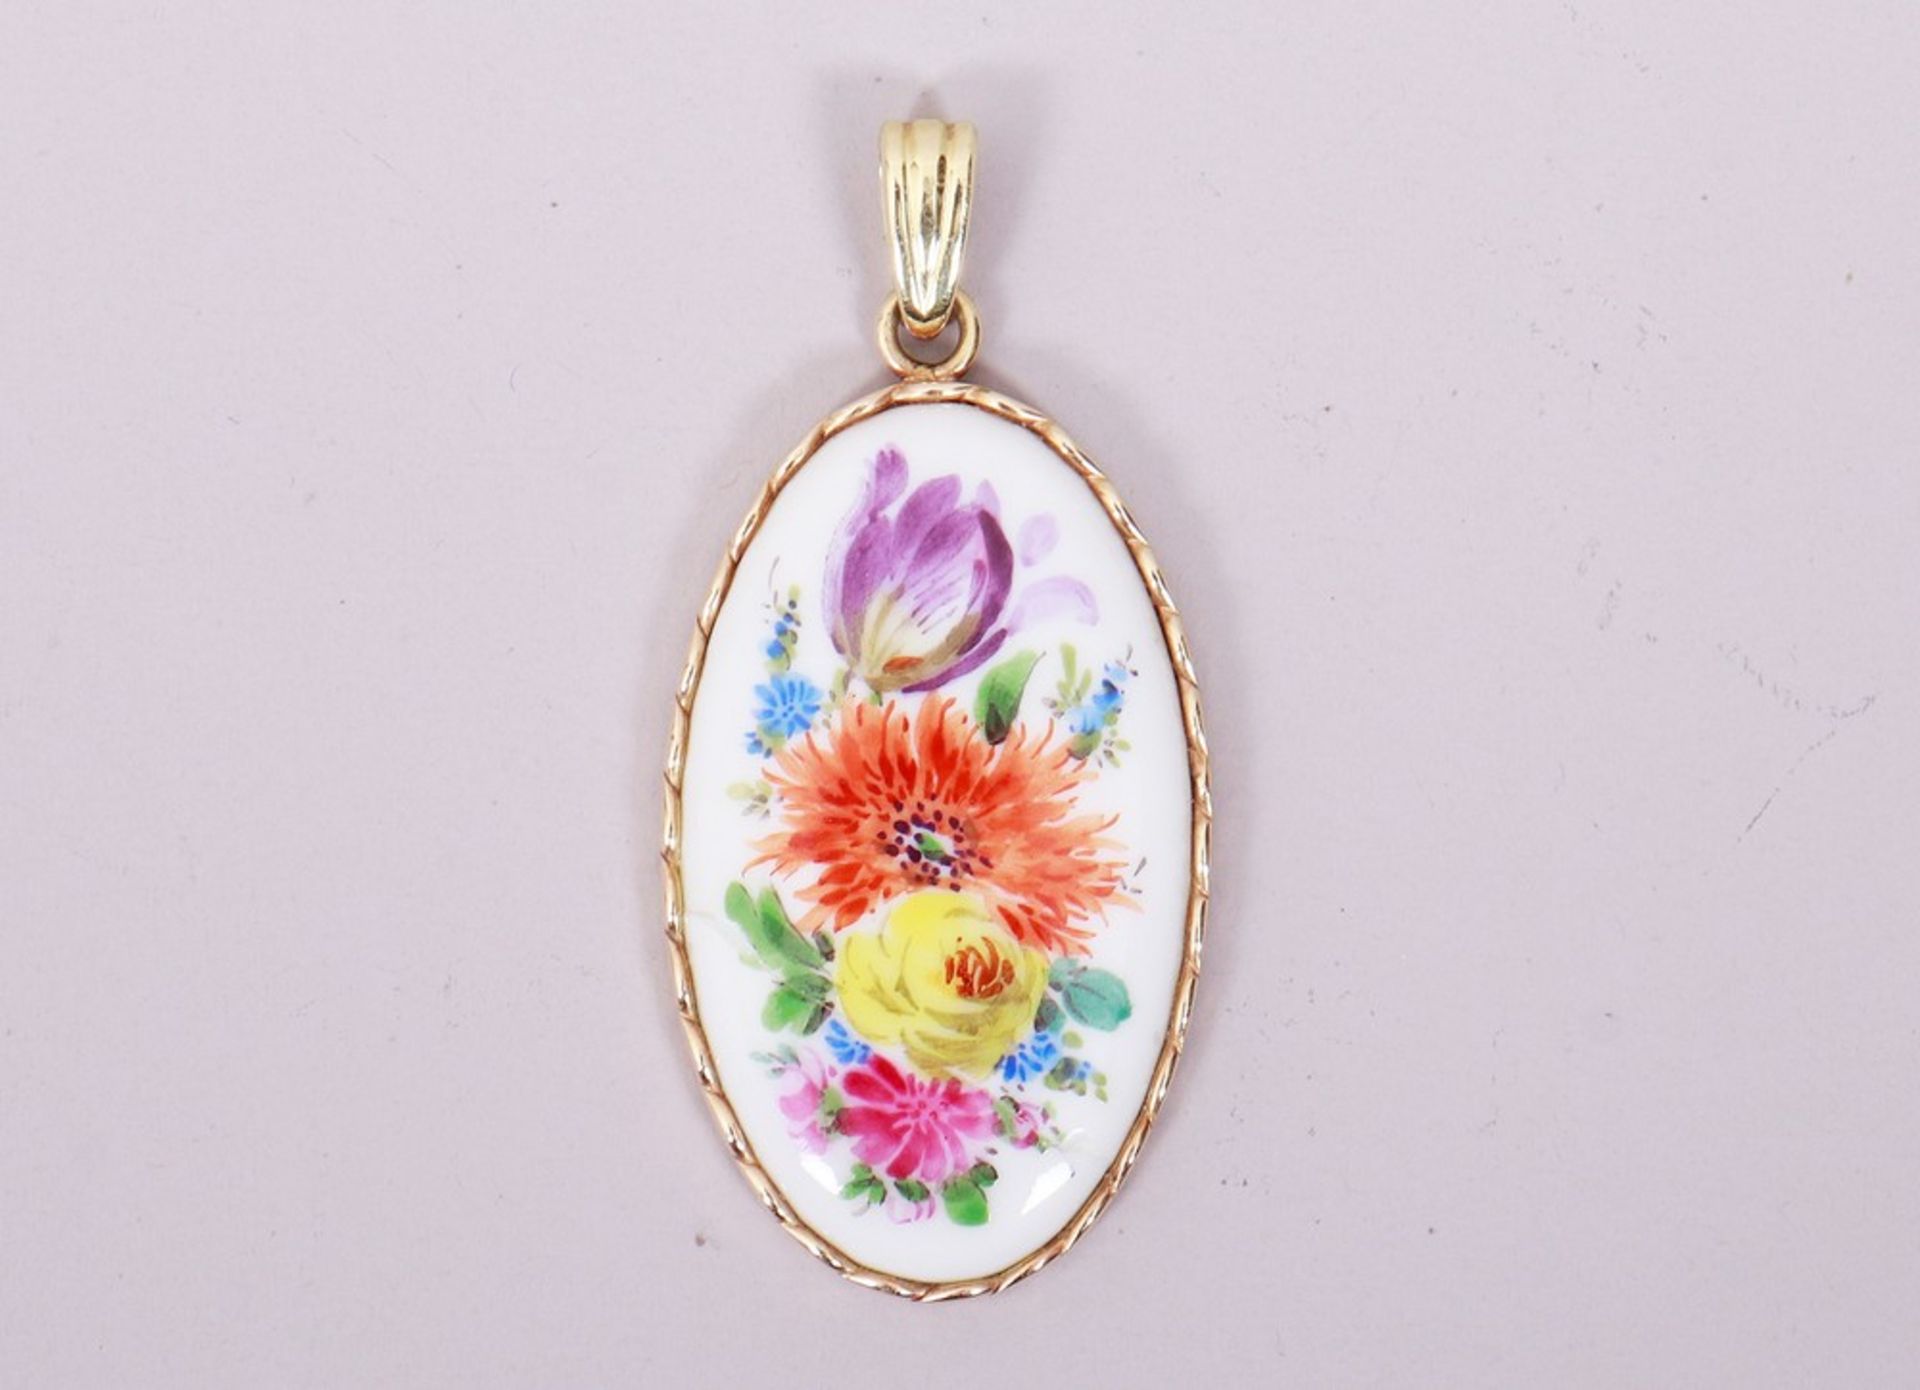 Meissen pendant, white porcelain with floral bouquet painting - Image 2 of 4